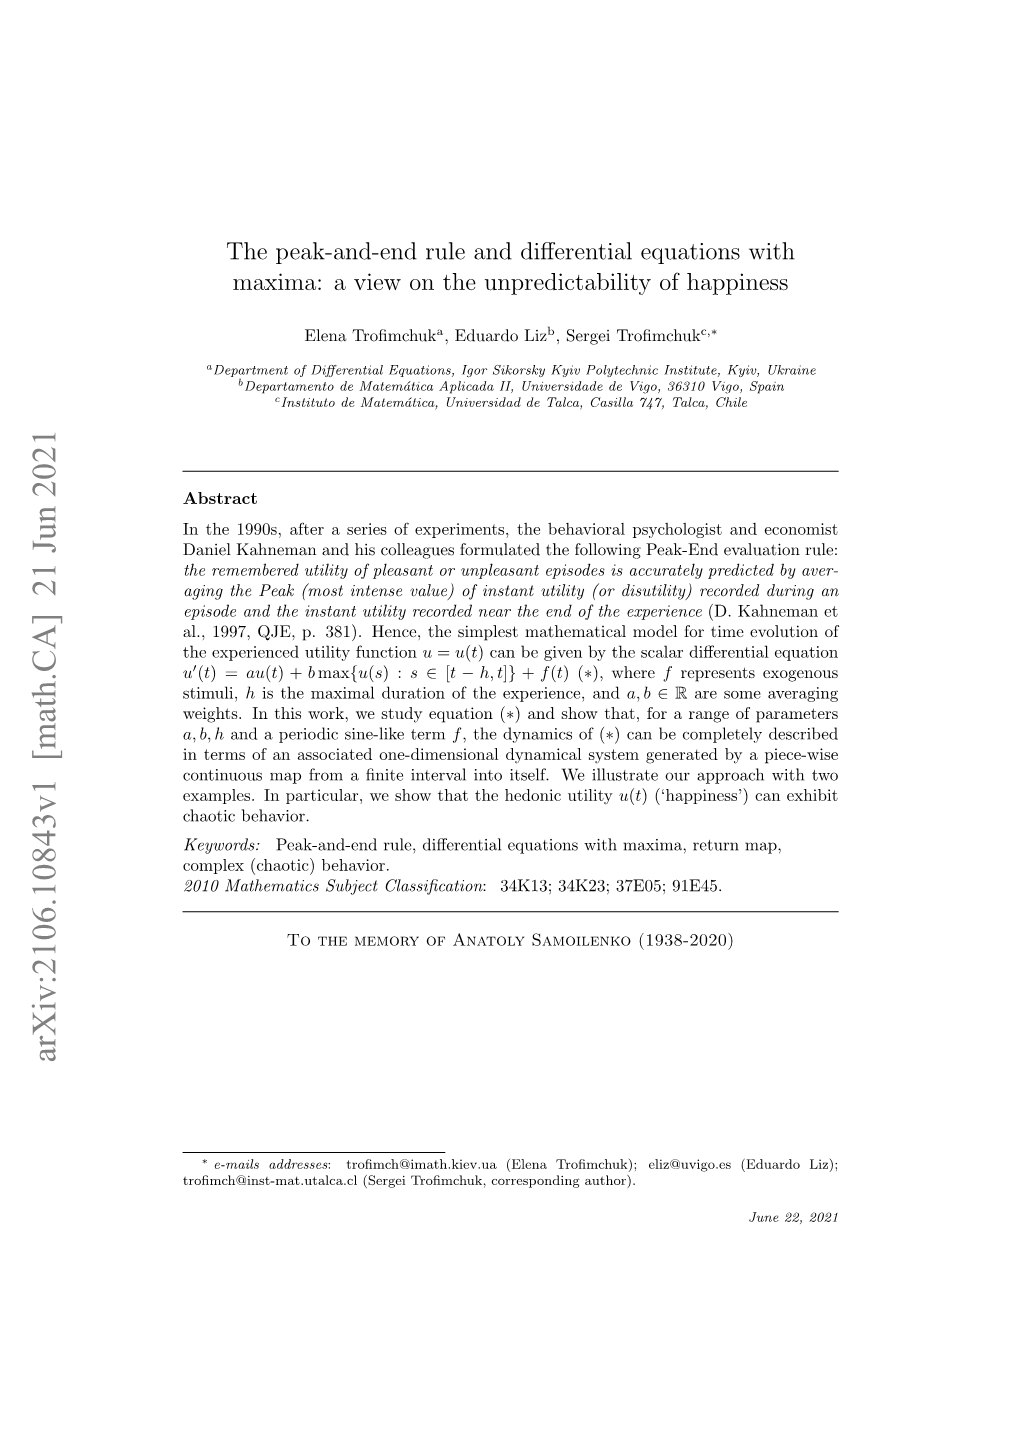 The Peak-And-End Rule and Differential Equations with Maxima: a View On